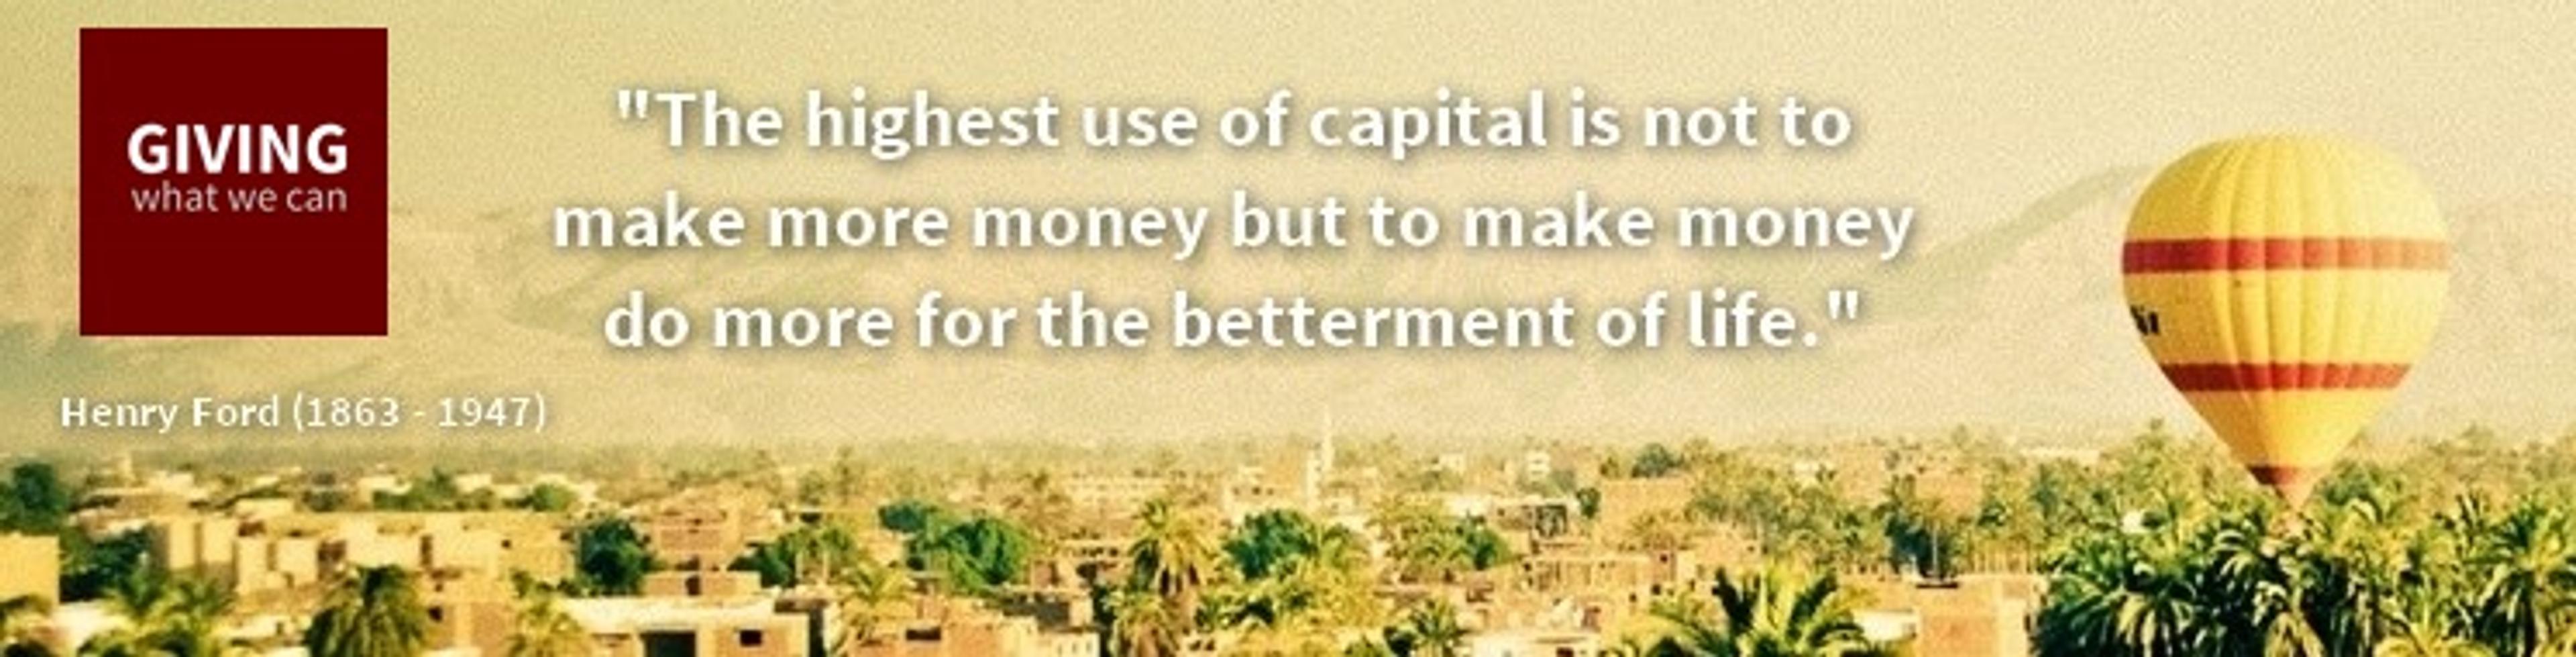 The highest use of capital is not to make more money but to make money do more for the betterment of life